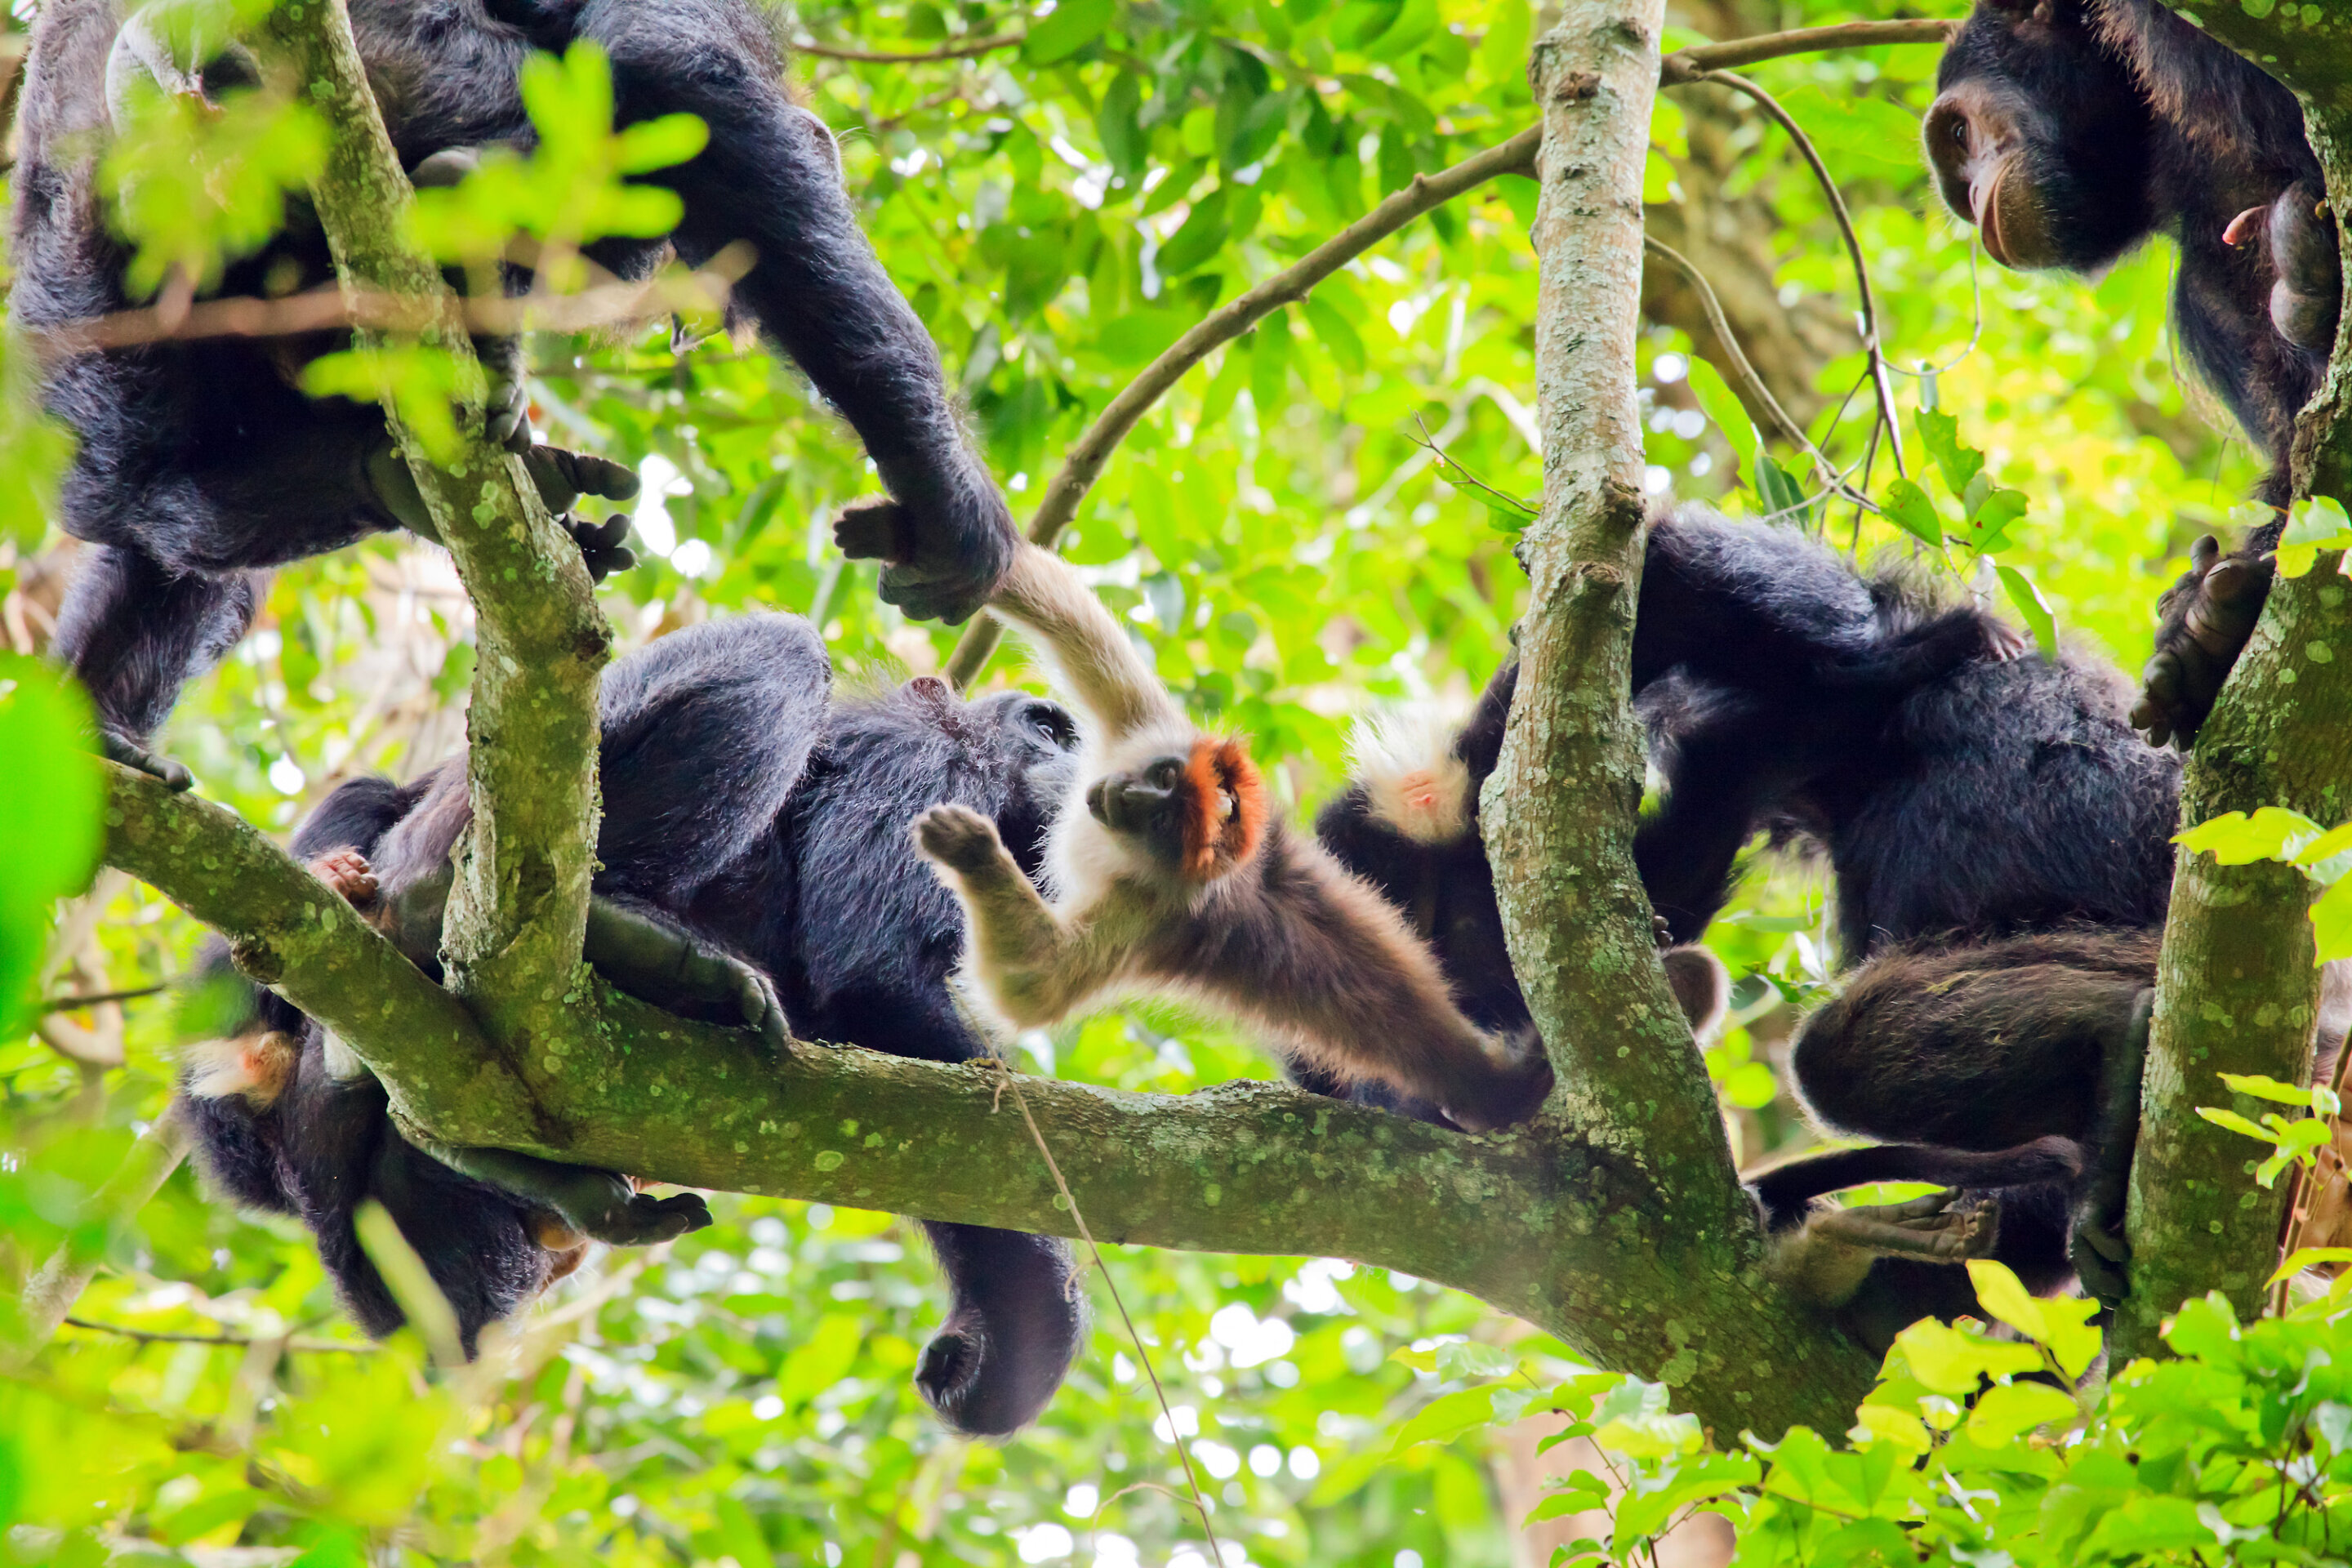 #Communication makes hunting easier for chimpanzees